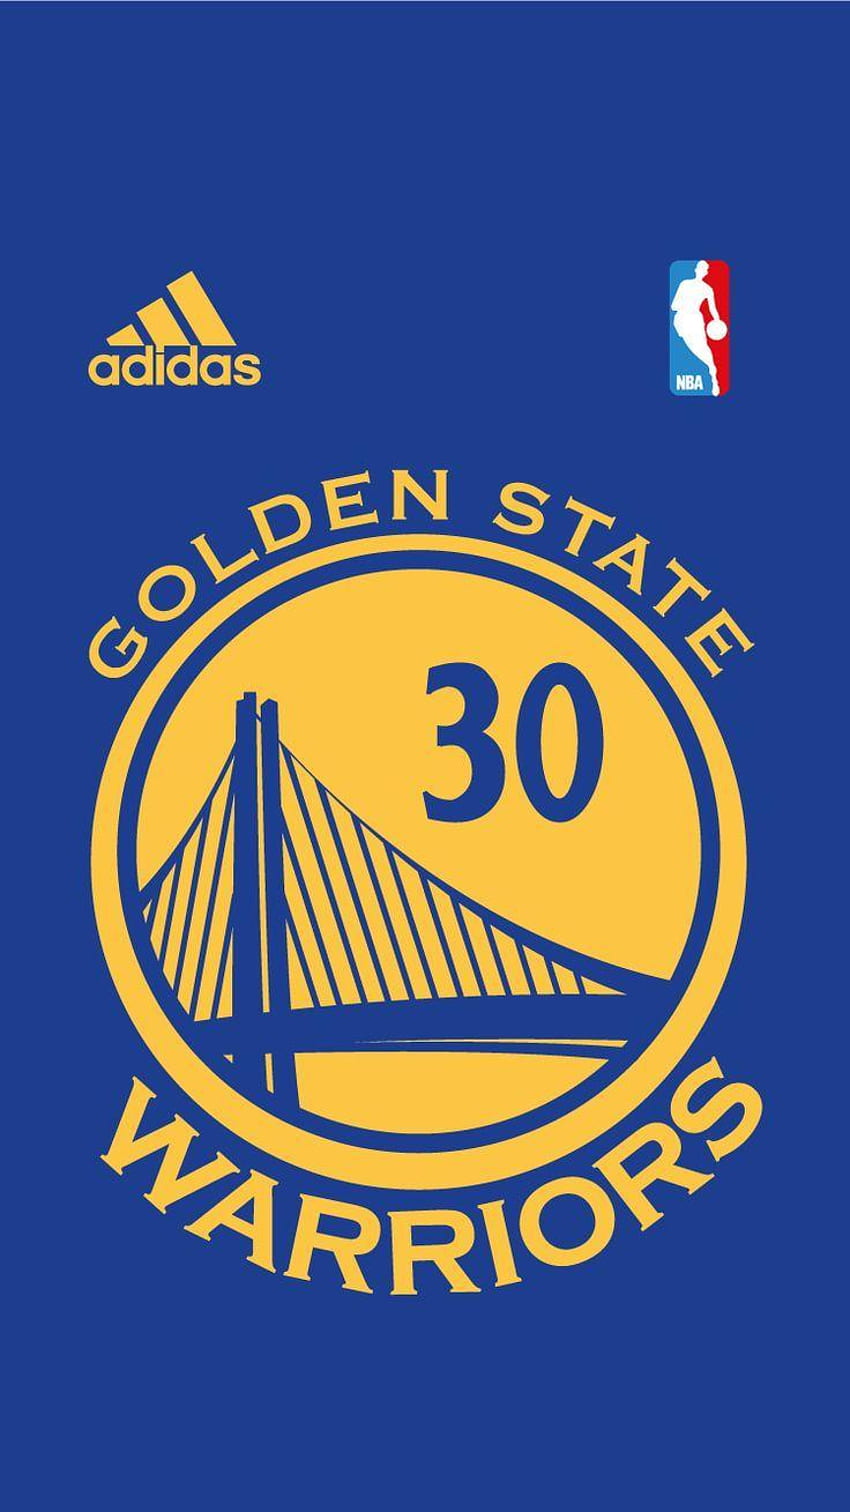 Download Nba gsw Wallpaper by Daex205yt - 96 - Free on ZEDGE™ now. Browse  millions o…